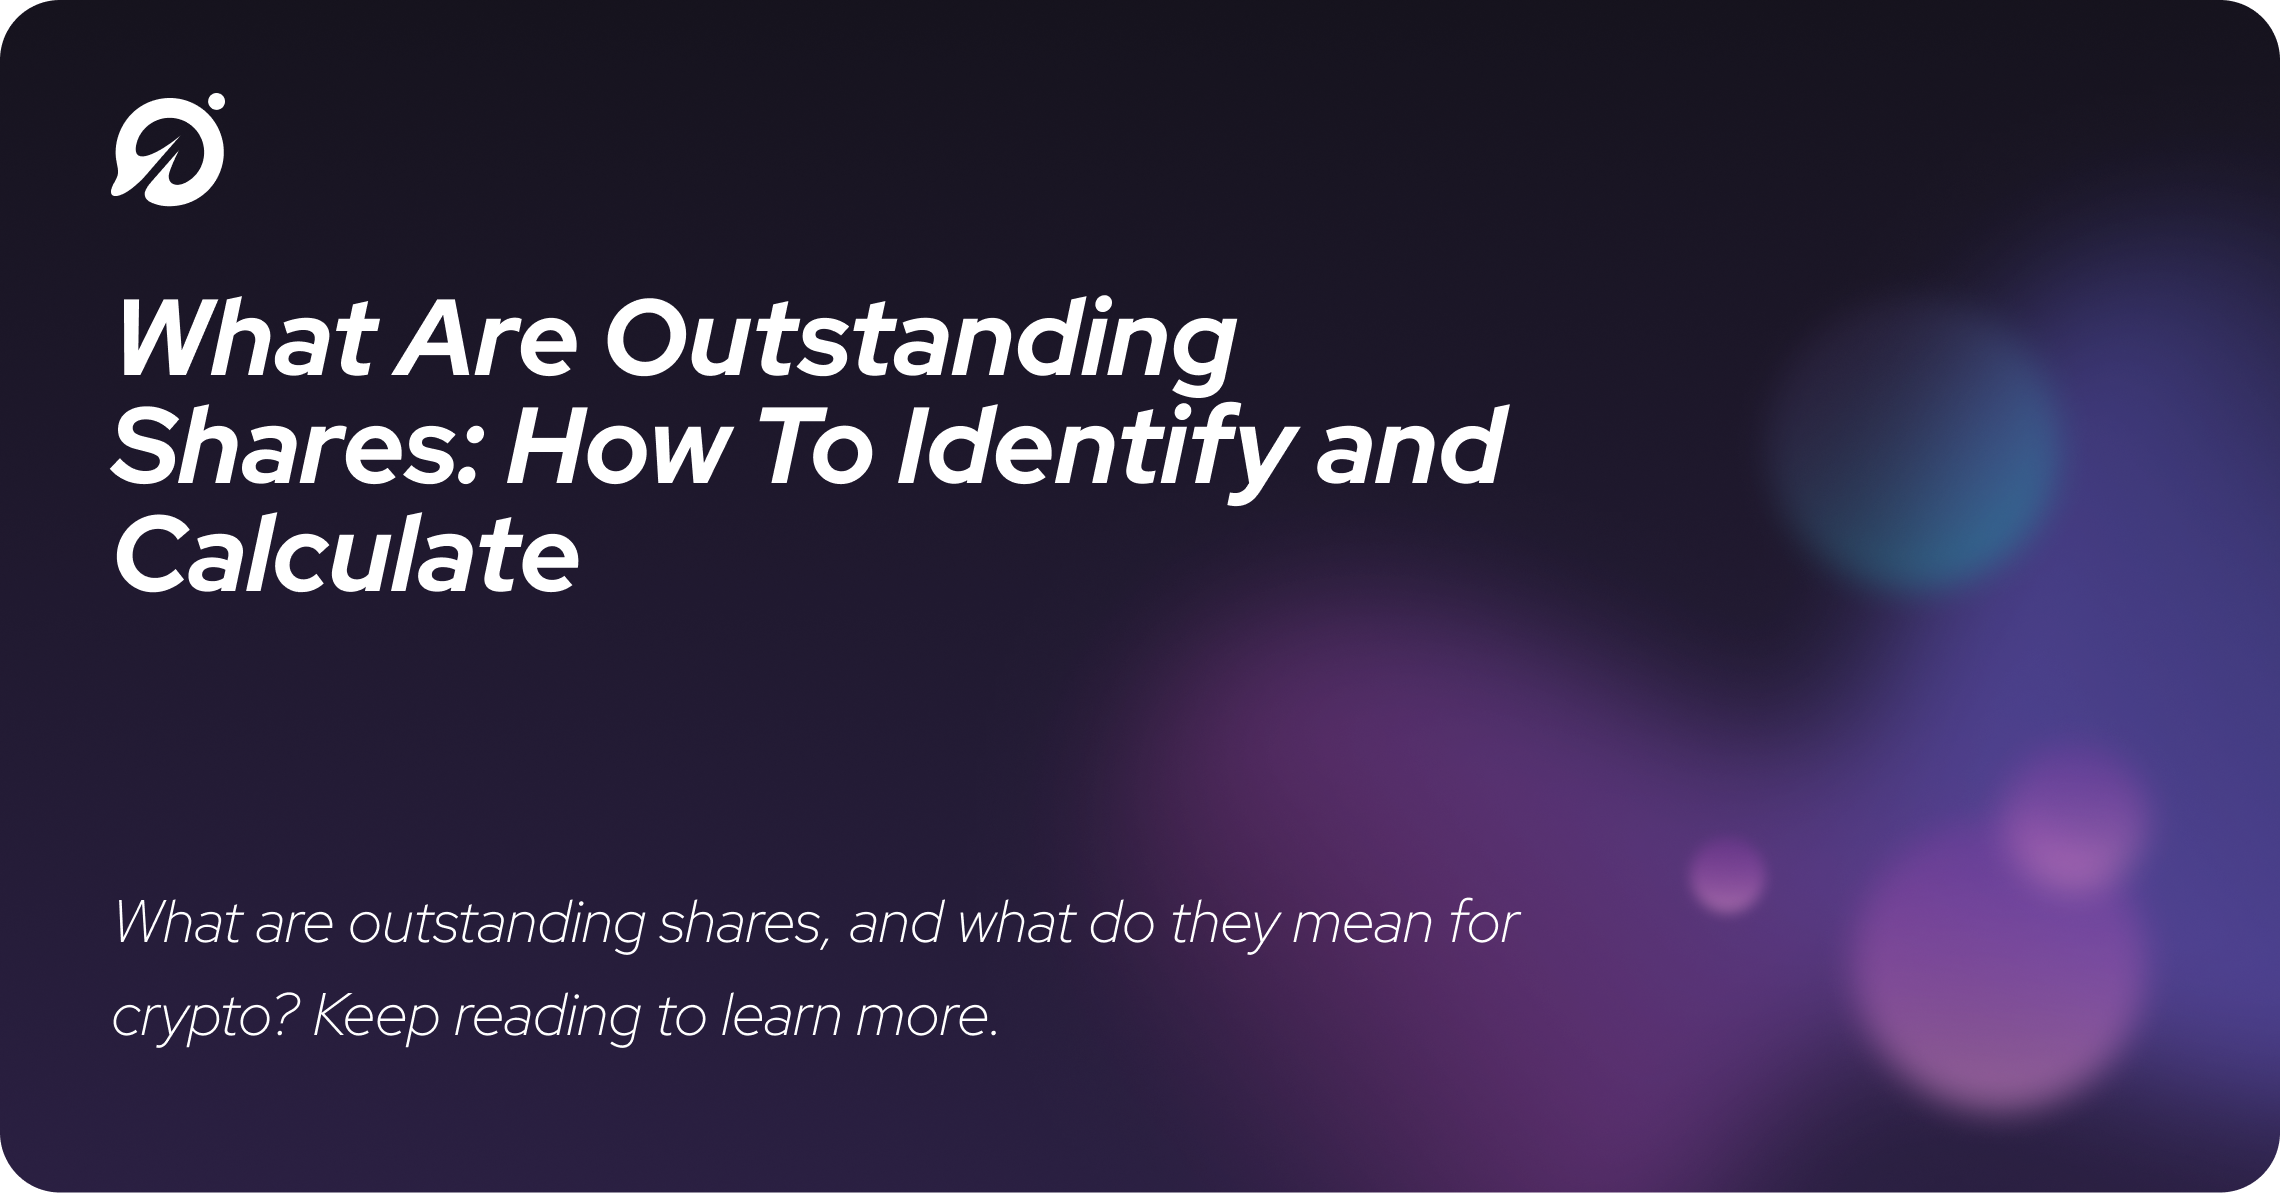 What Are Outstanding Shares: How To Identify and Calculate